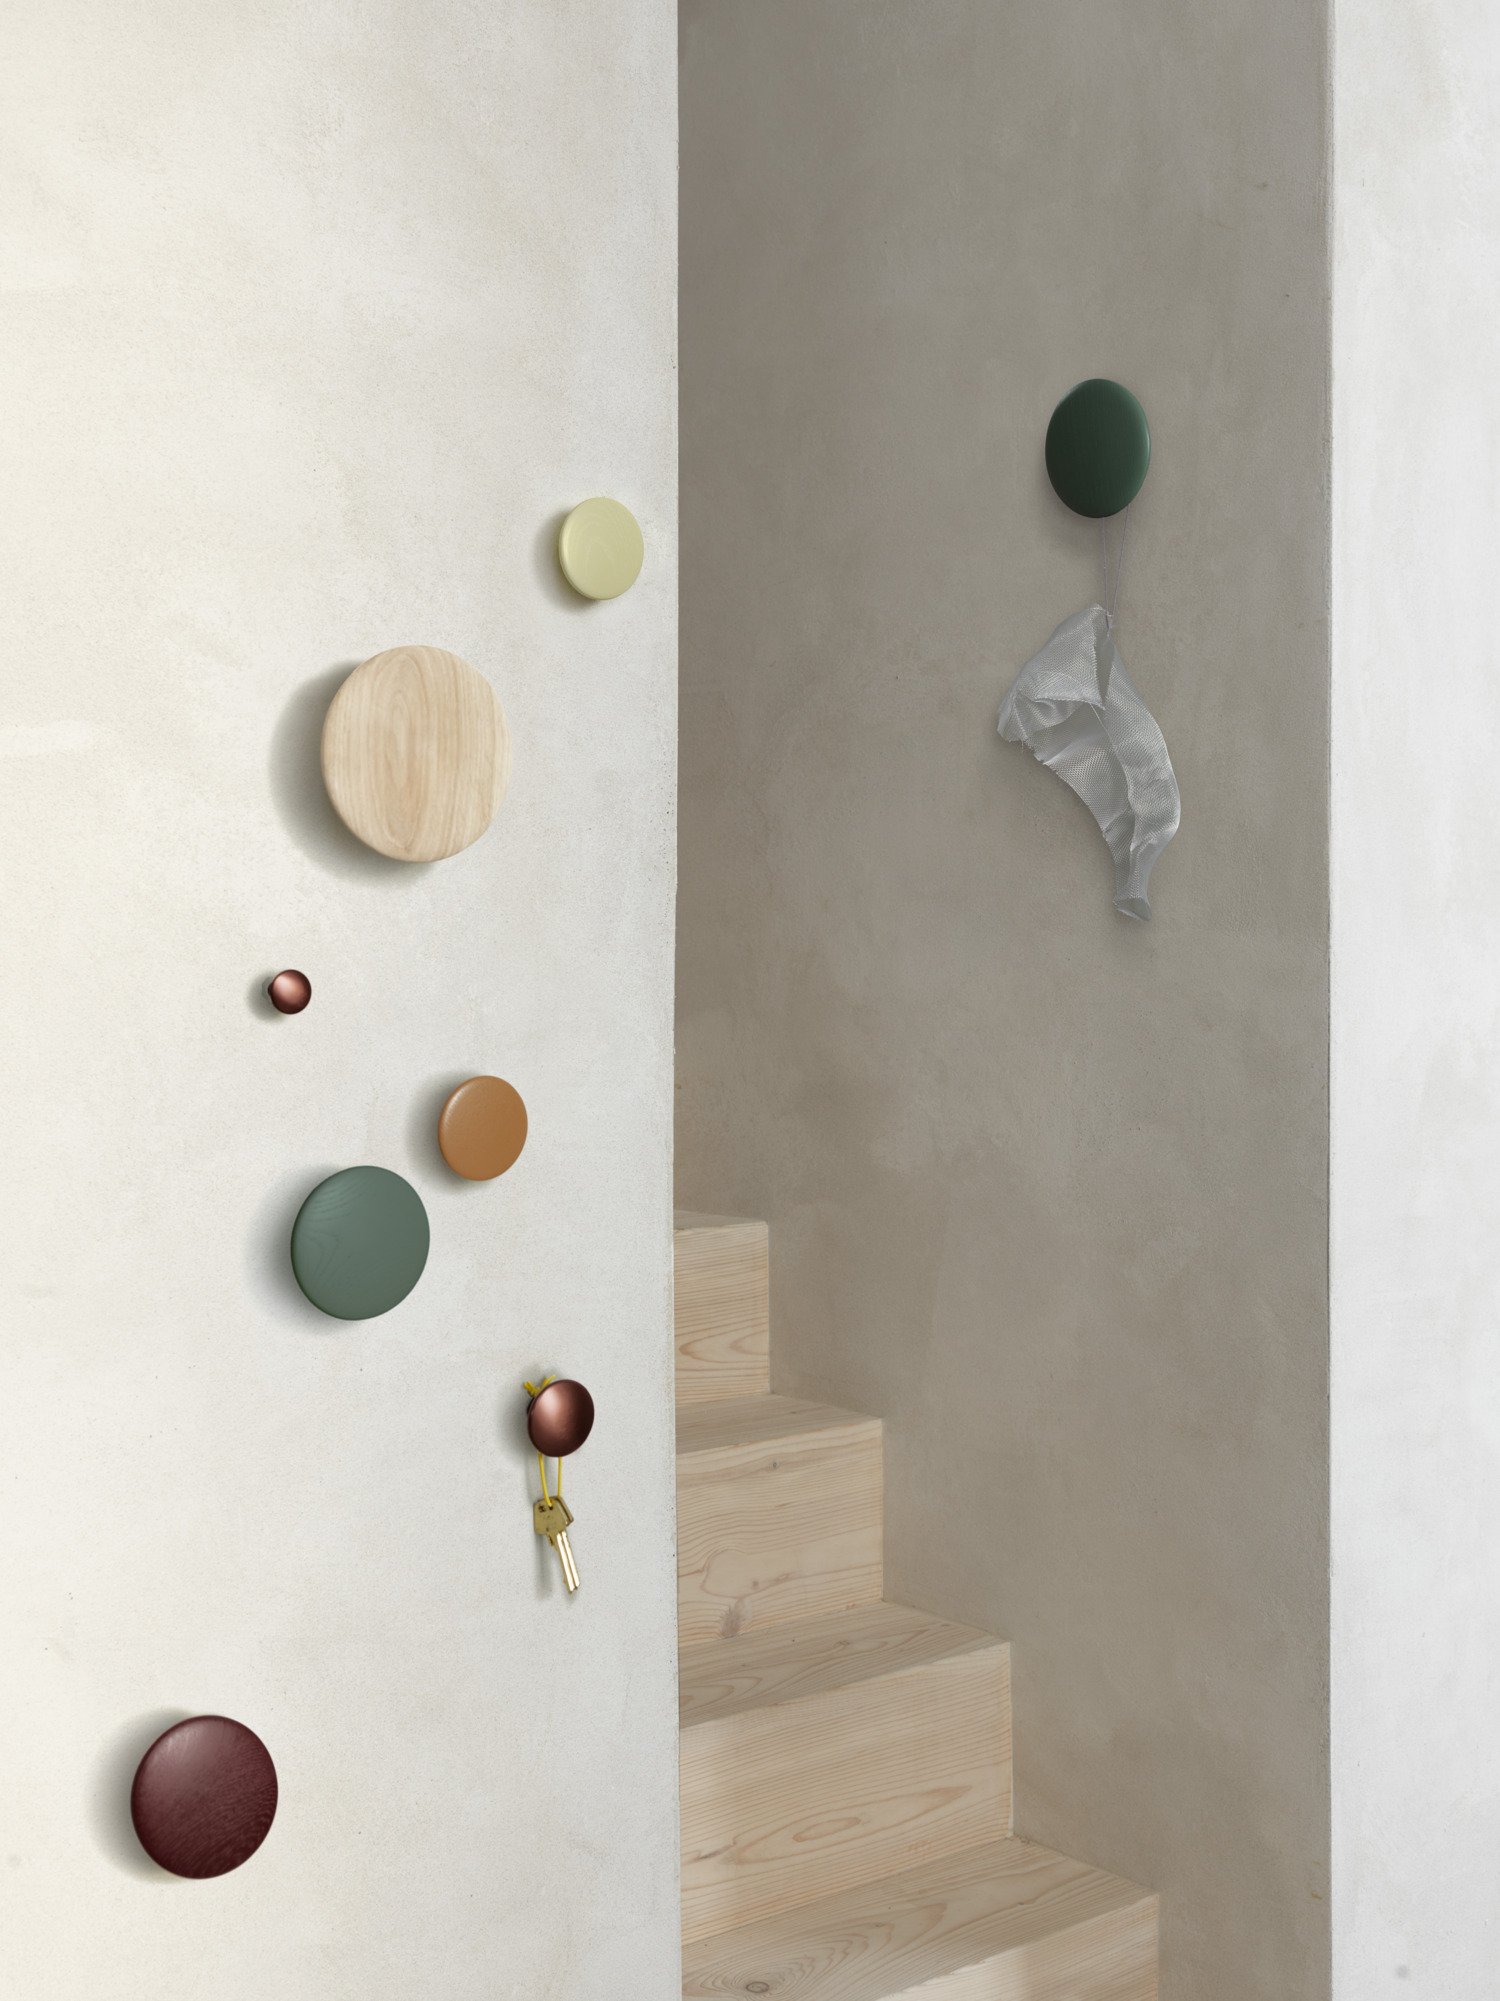 The Dots Wood | Get playful with wooden coat hooks